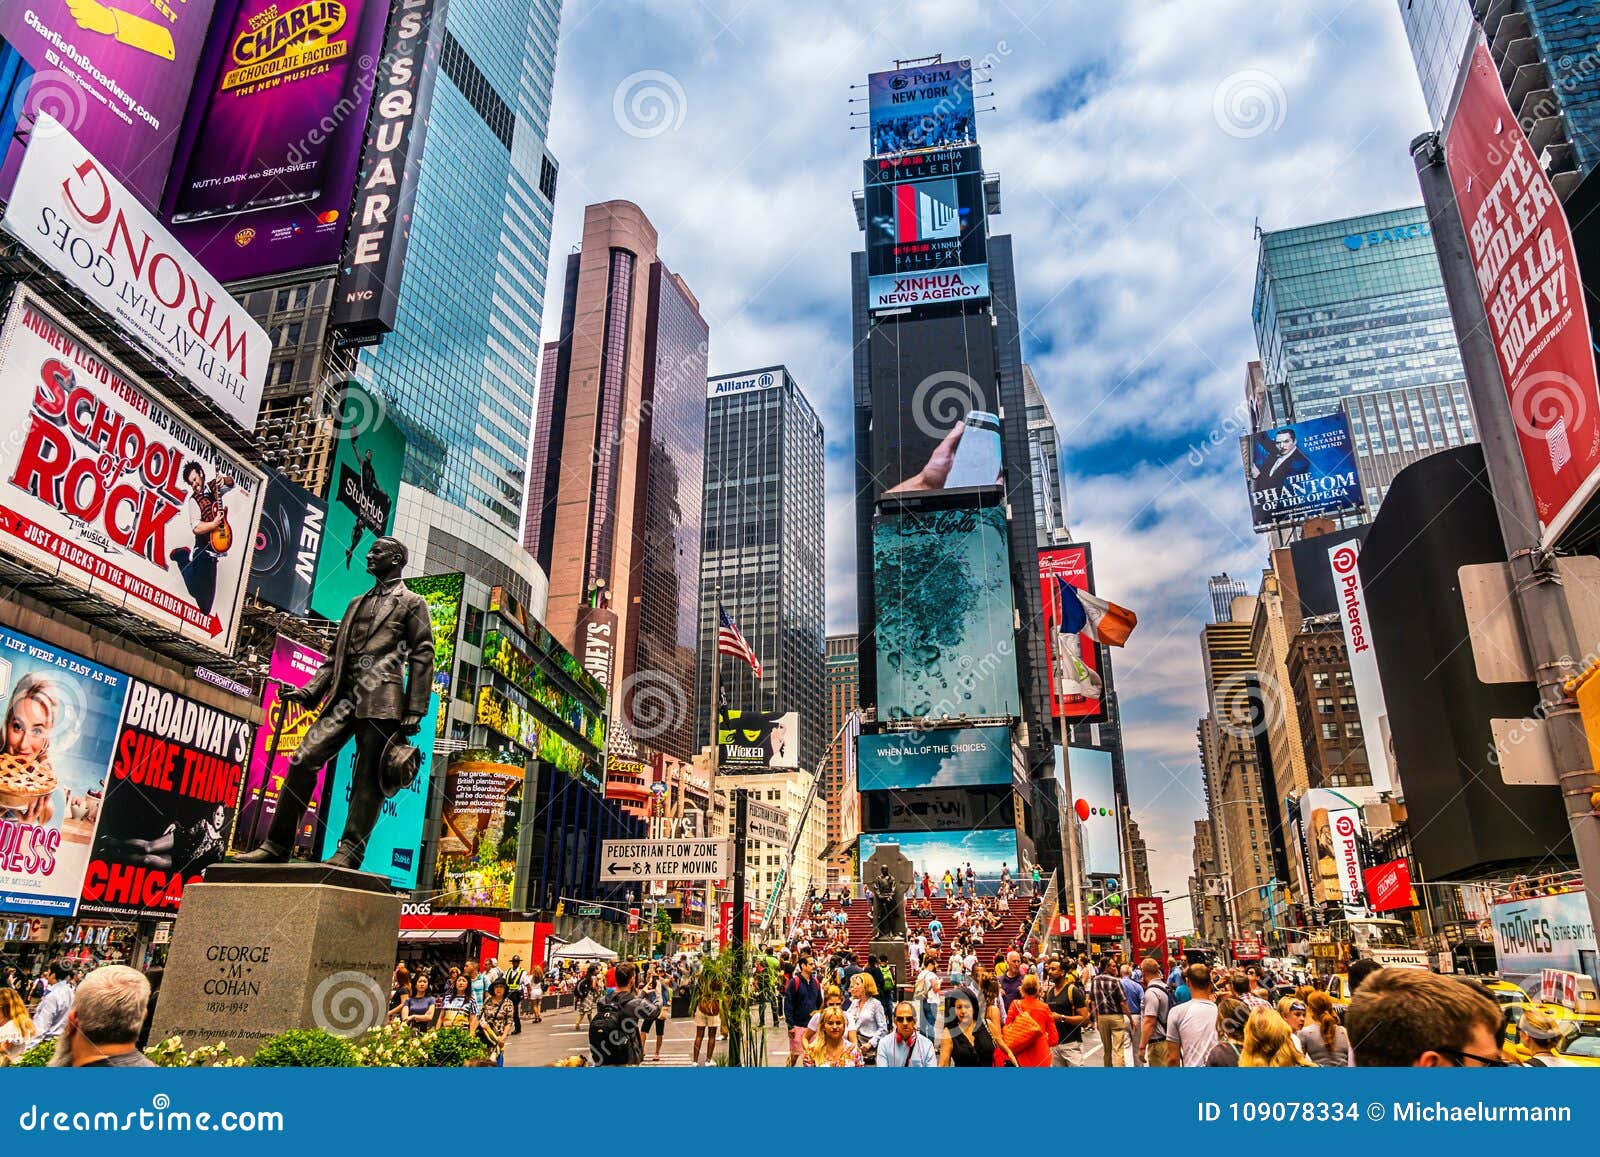 Busy Times Square In NYC The Place Is Famous As World S Busiest Place For Pedestrians And An